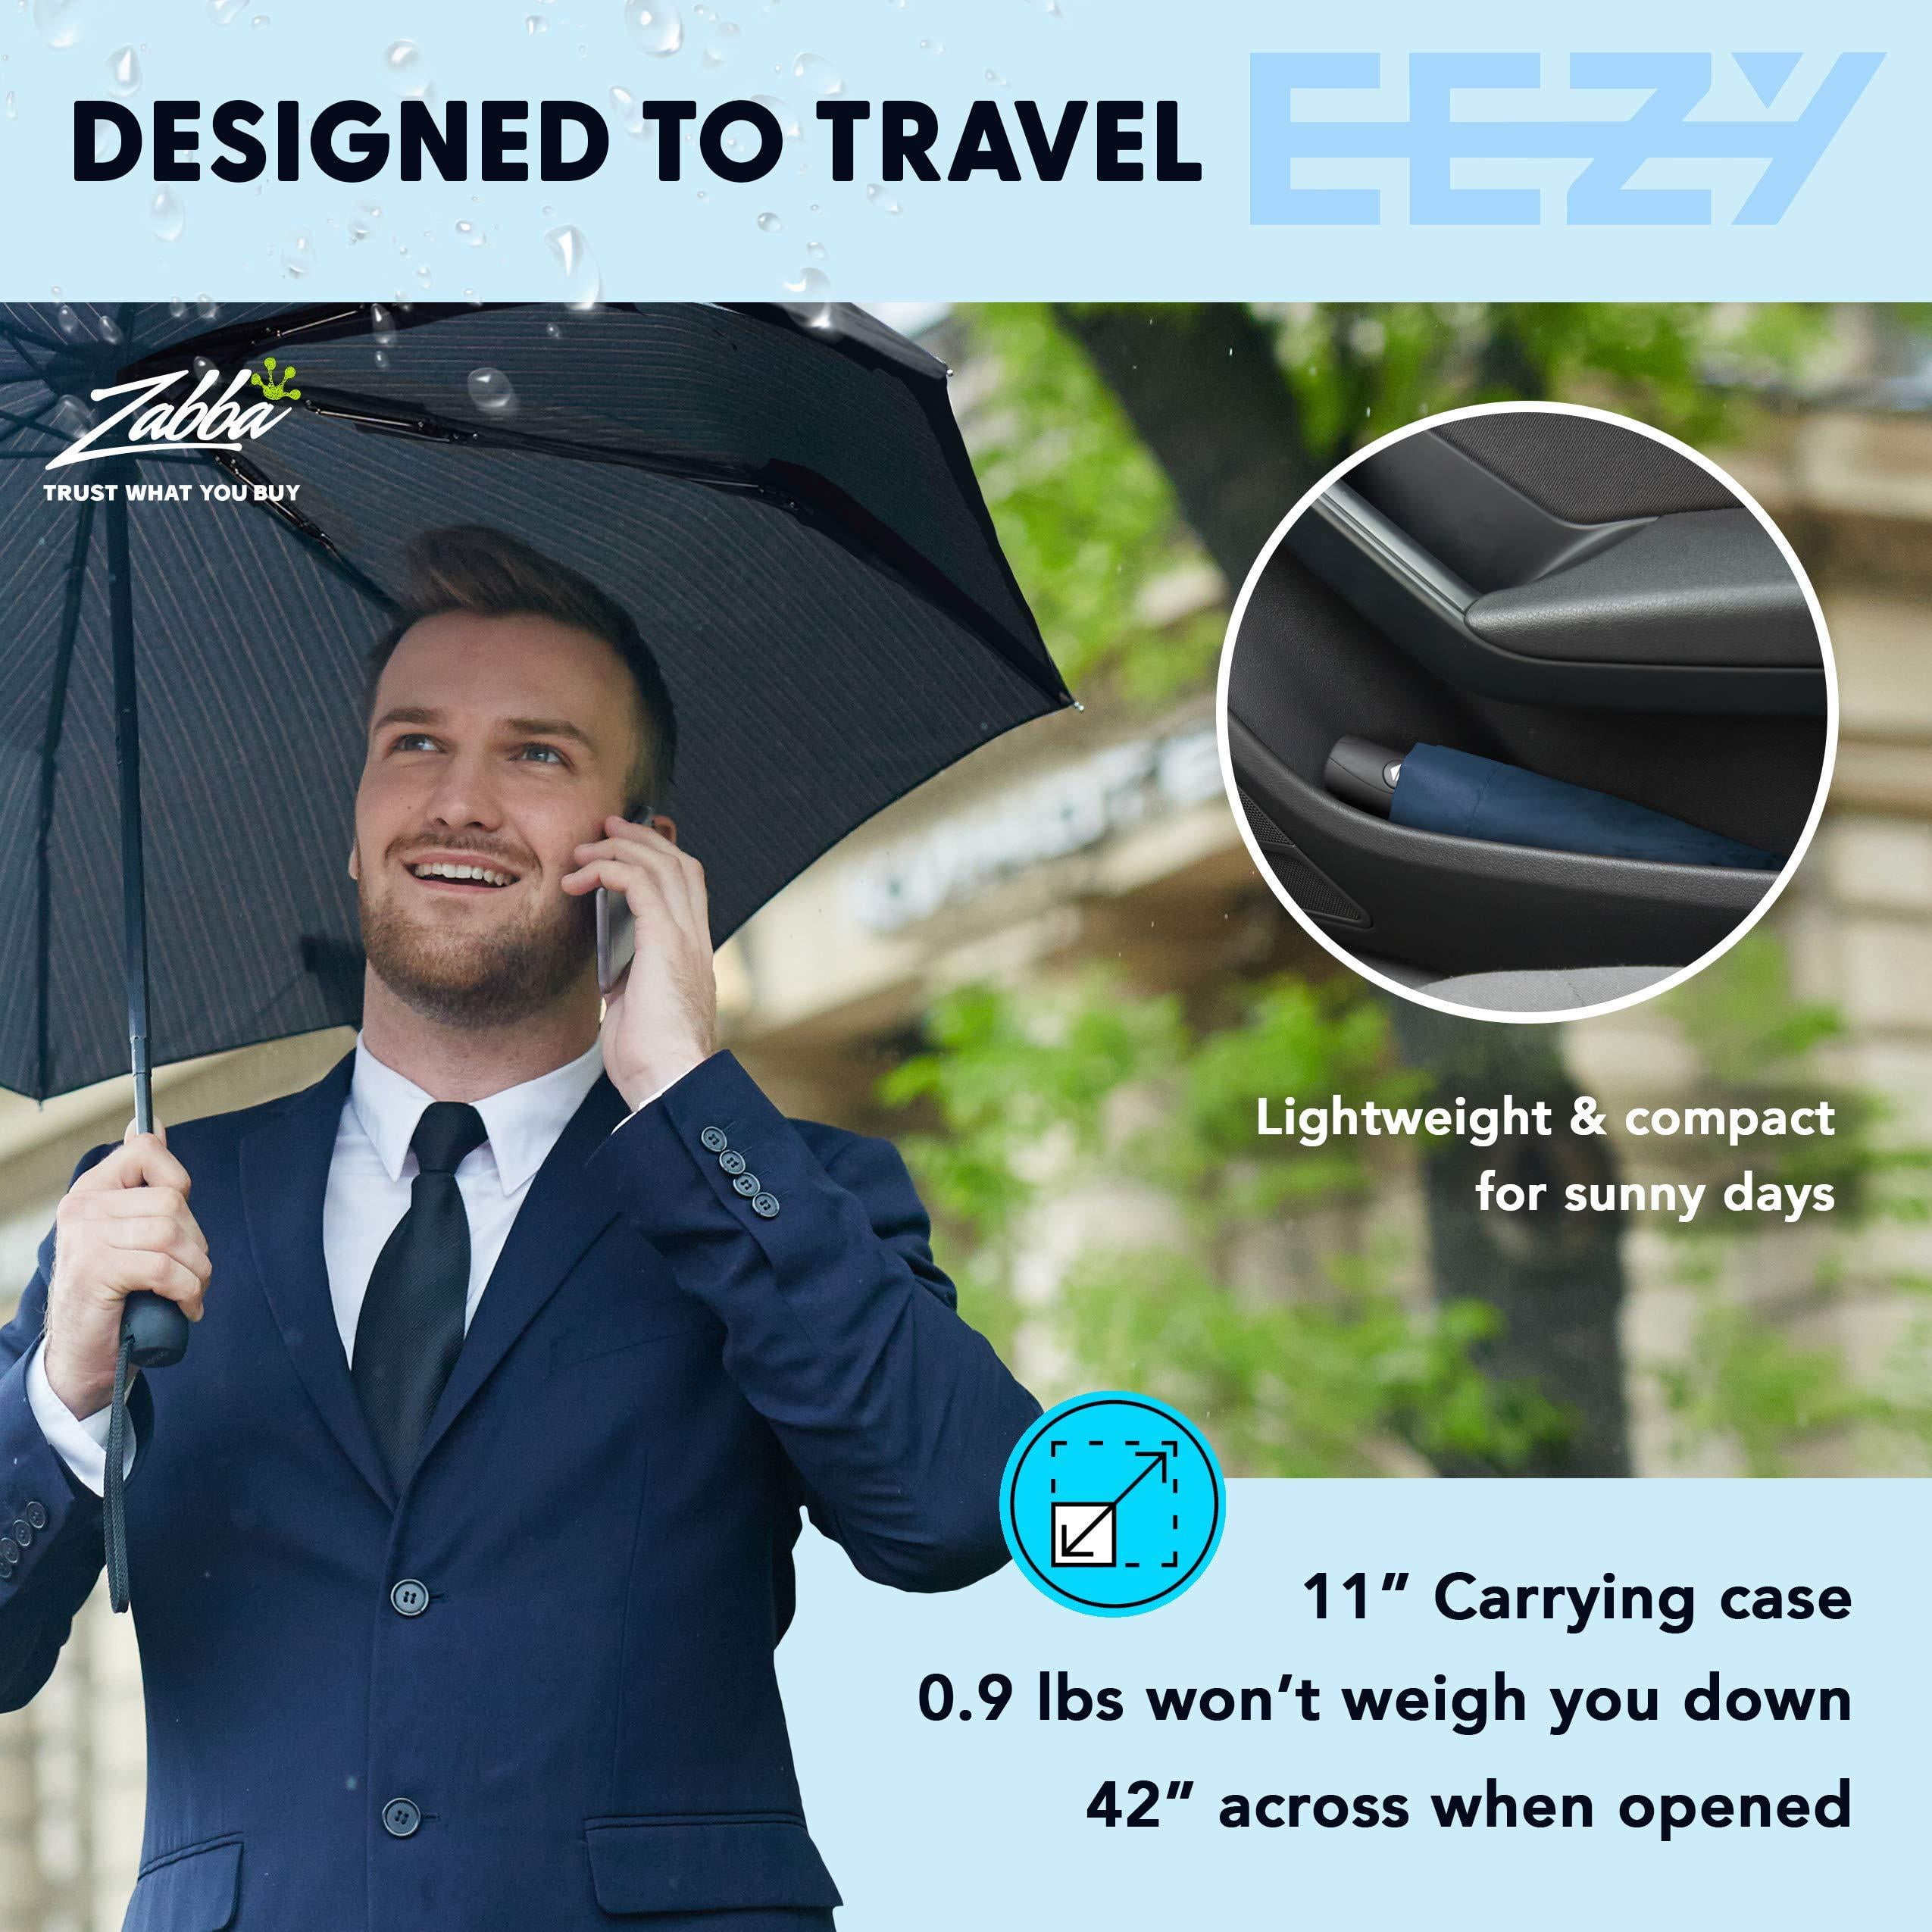 Sturdy Lifetime Guarantee EEZ-Y Compact Travel Umbrella with Windproof Double Canopy Construction Portable and Lightweight for Easy Carrying Auto Open Close Button for One Handed Operation